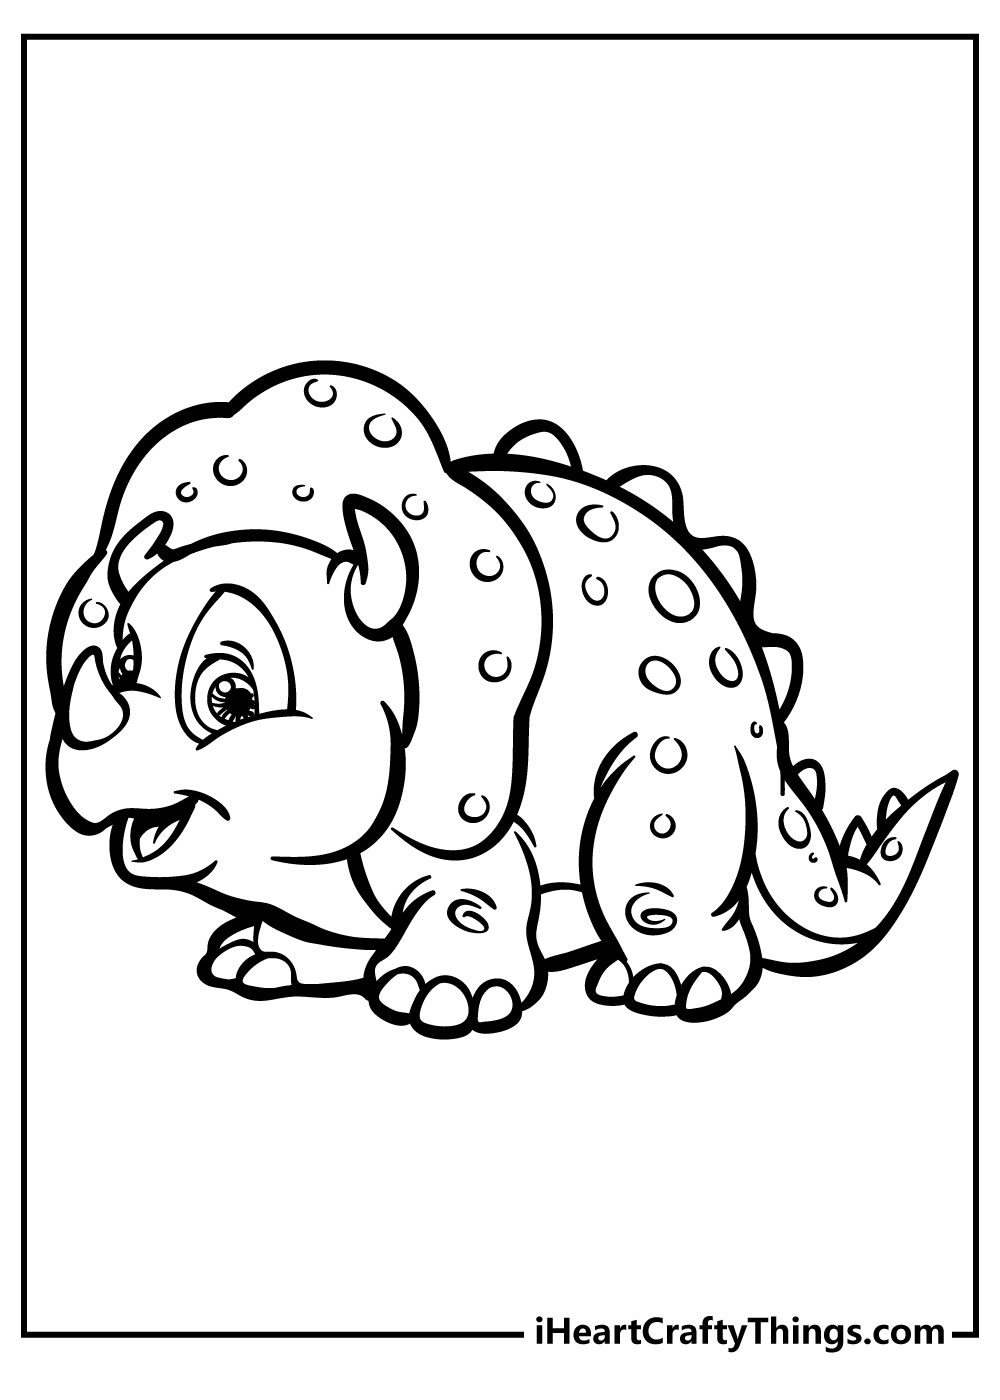 Baby Dinosaur Coloring Pages for adults free printable